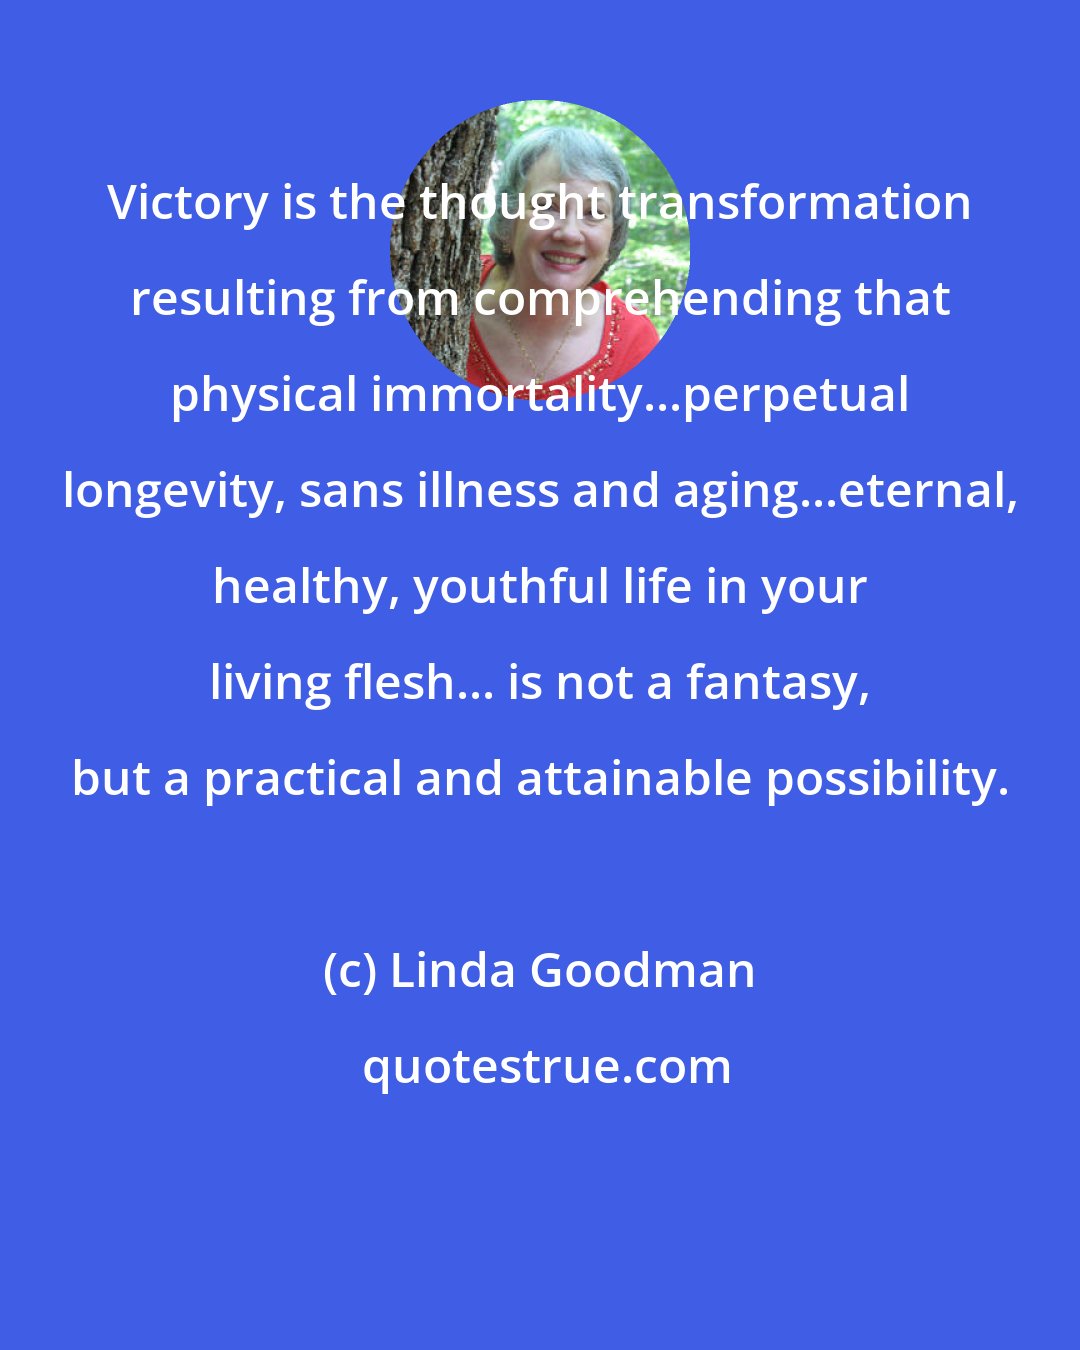 Linda Goodman: Victory is the thought transformation resulting from comprehending that physical immortality...perpetual longevity, sans illness and aging...eternal, healthy, youthful life in your living flesh... is not a fantasy, but a practical and attainable possibility.